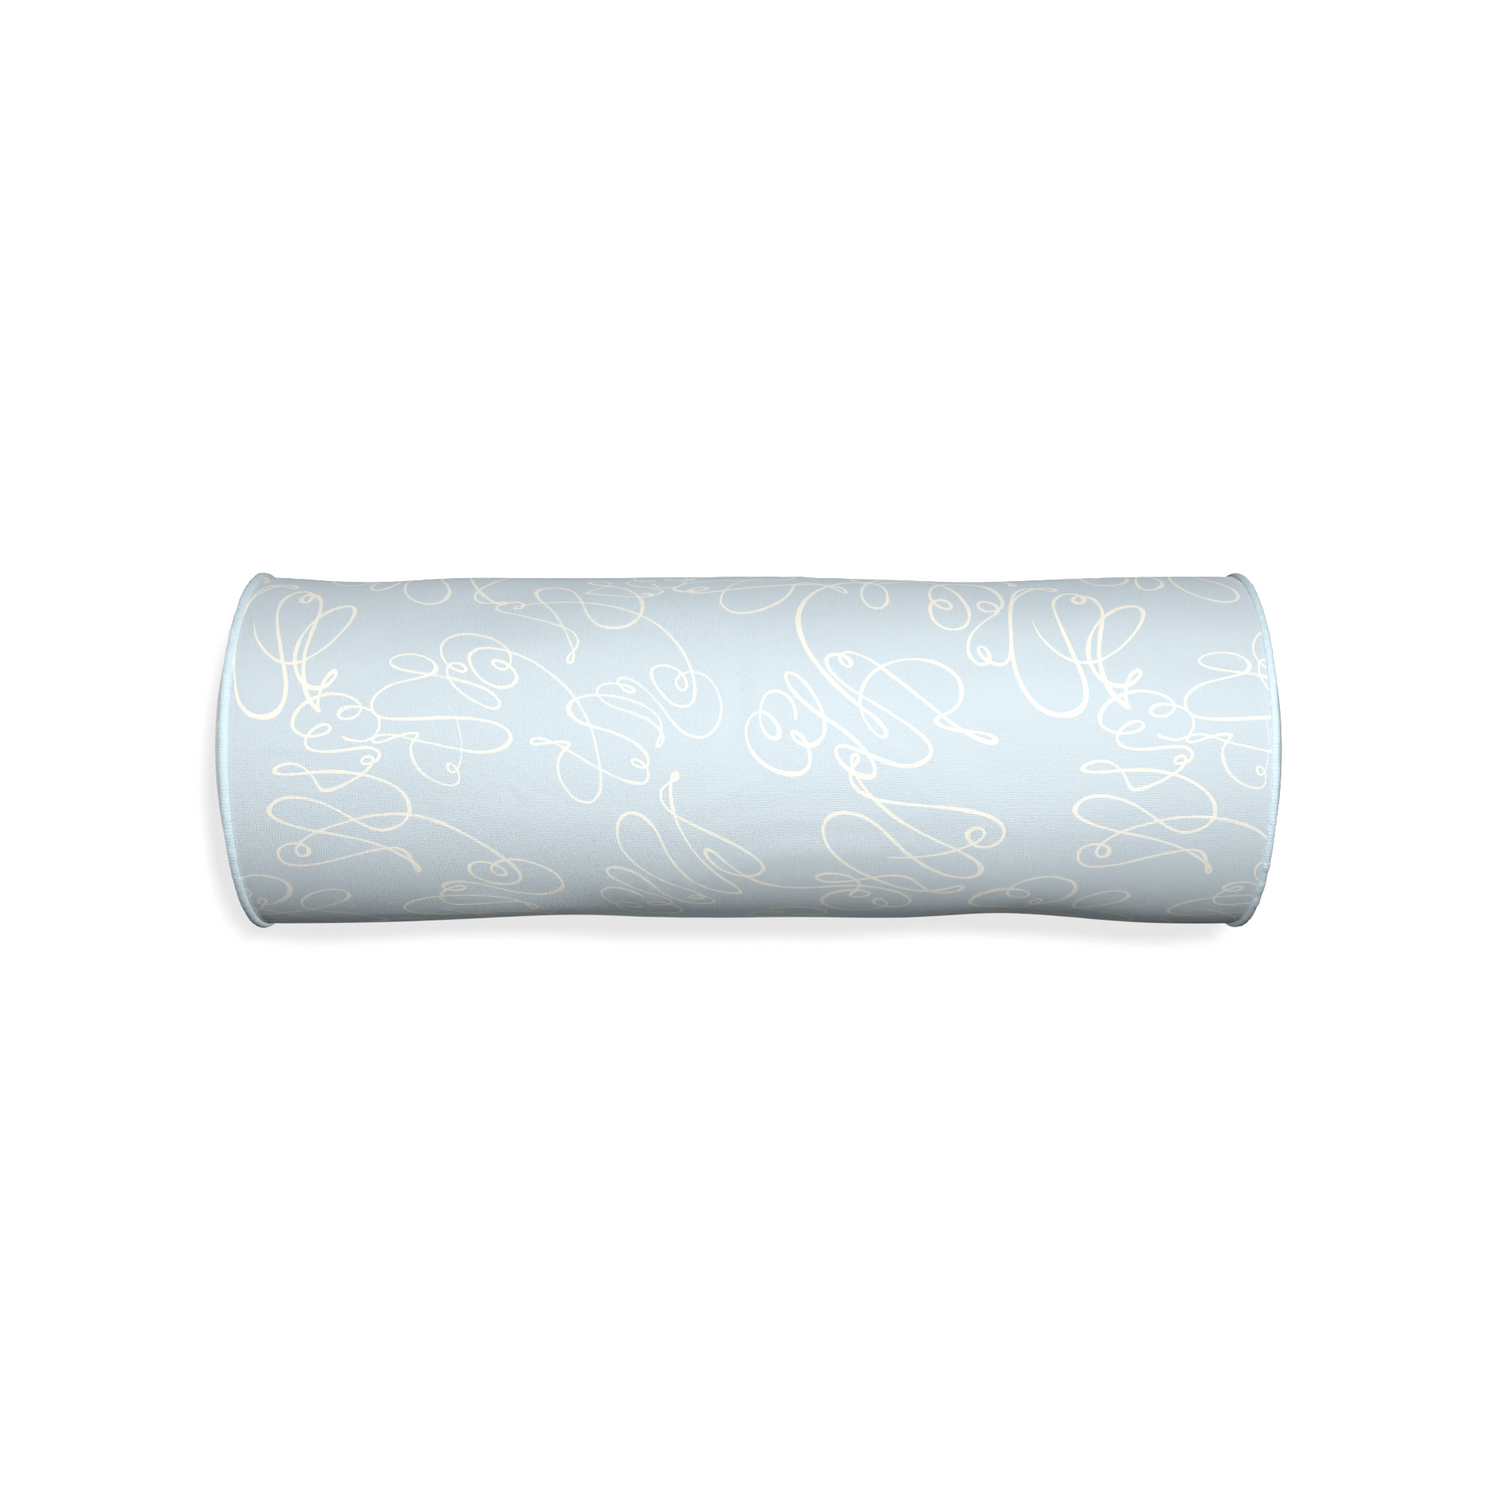 Bolster mirabella custom pillow with powder piping on white background